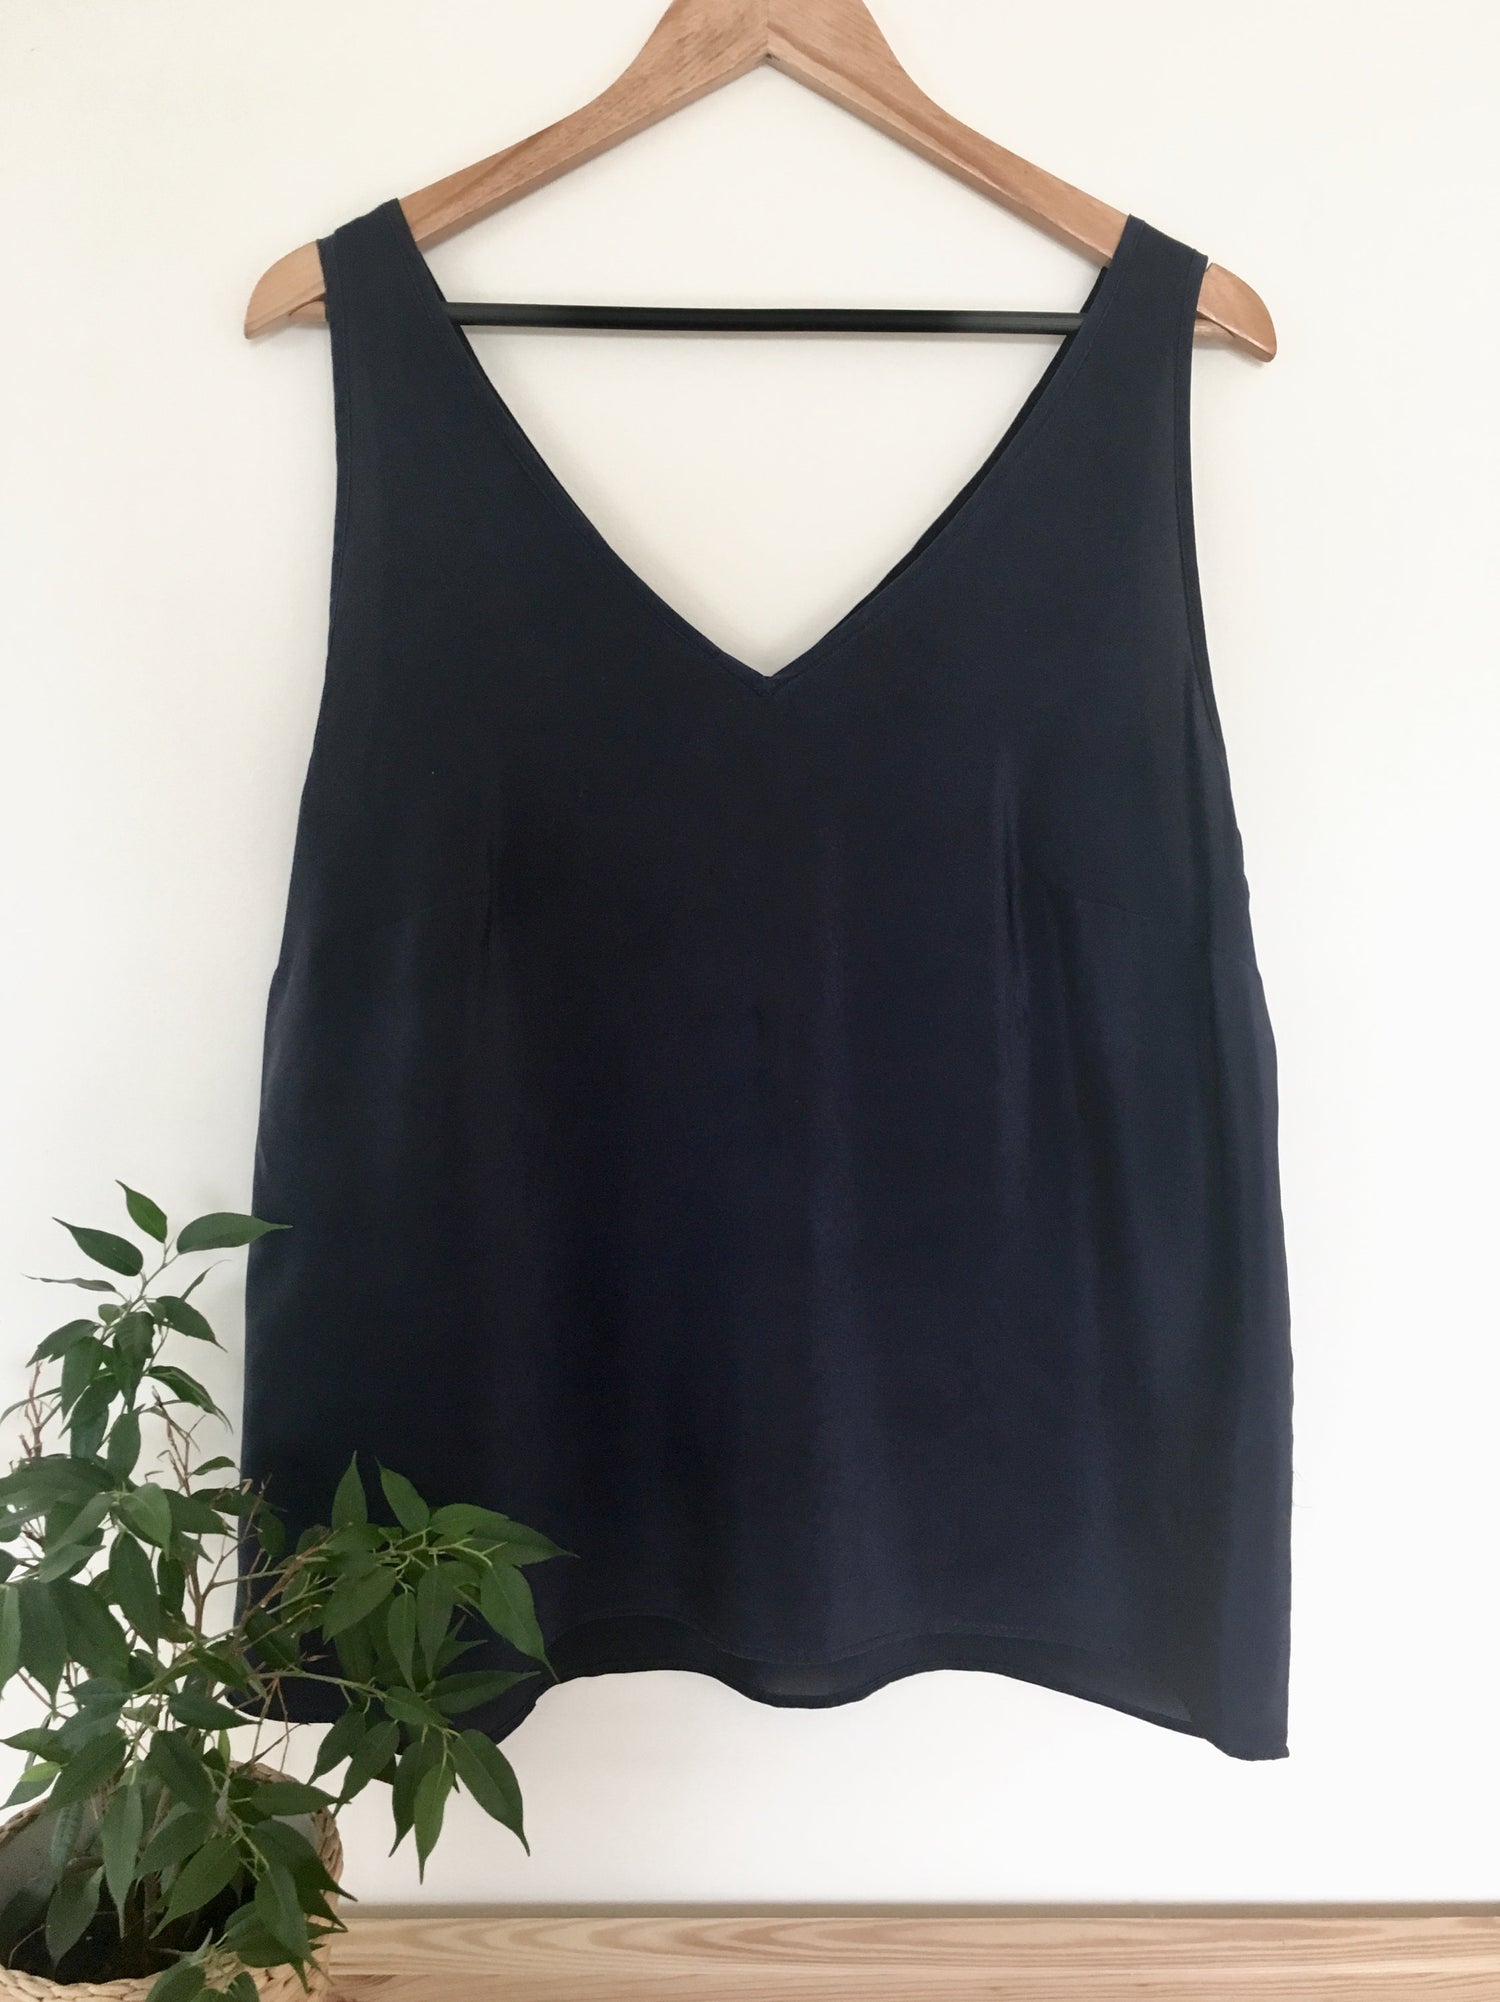 V-neck Camisole sewing pattern  Wardrobe By Me - We love sewing!